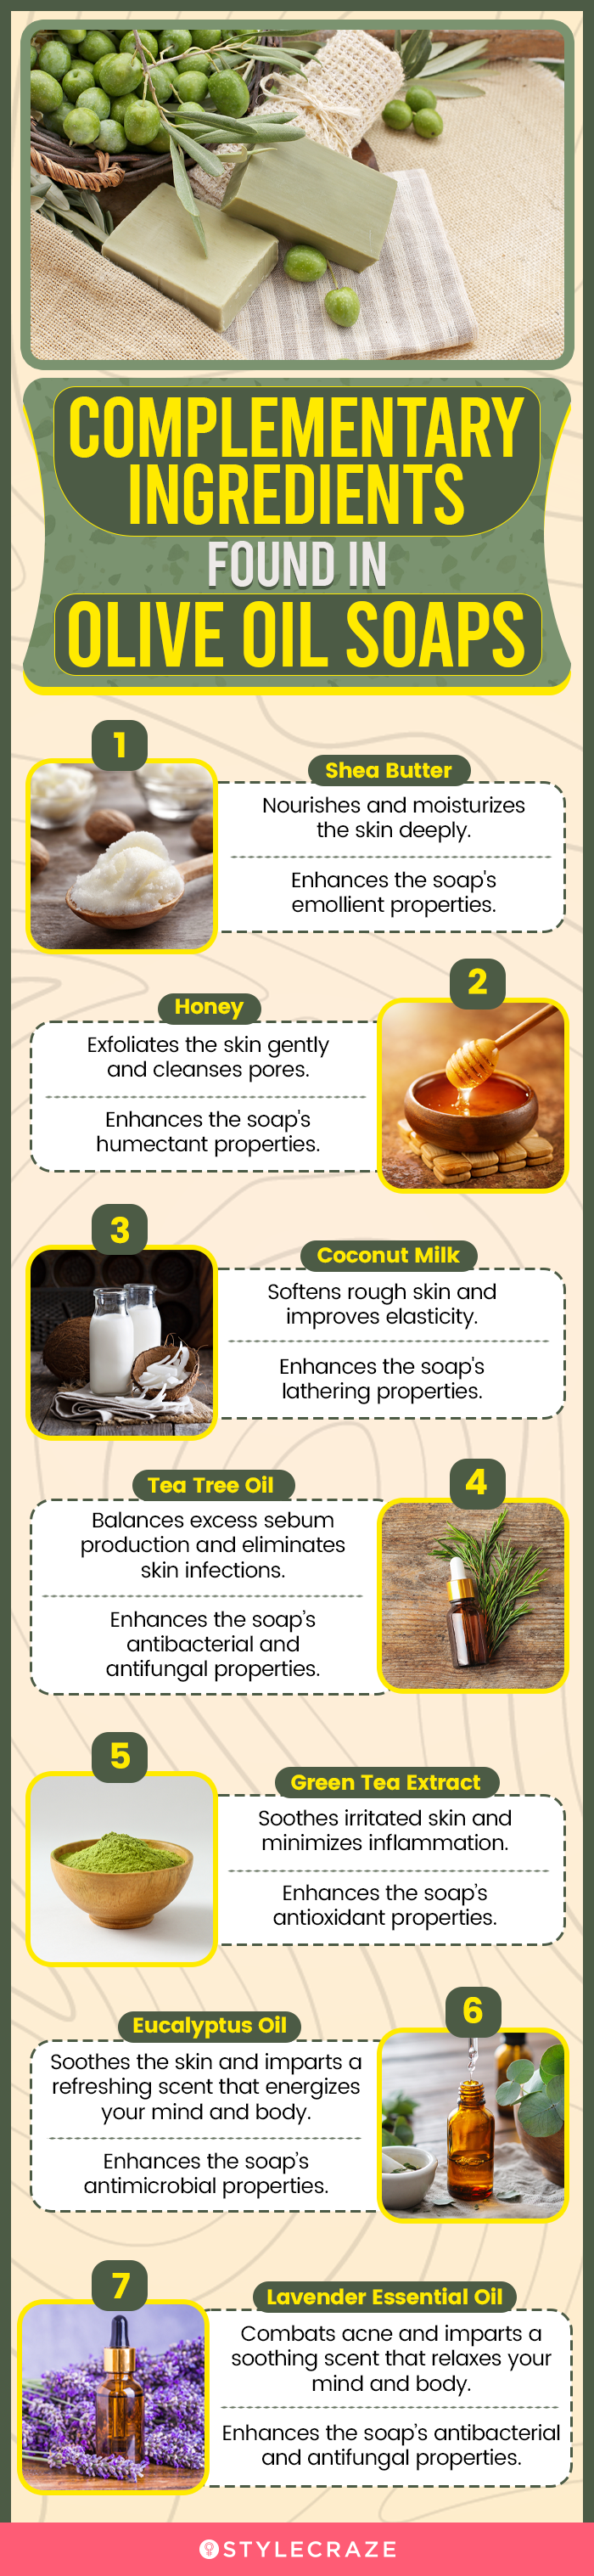 Complementary Ingredients Found In Olive Oil Soaps (infographic)